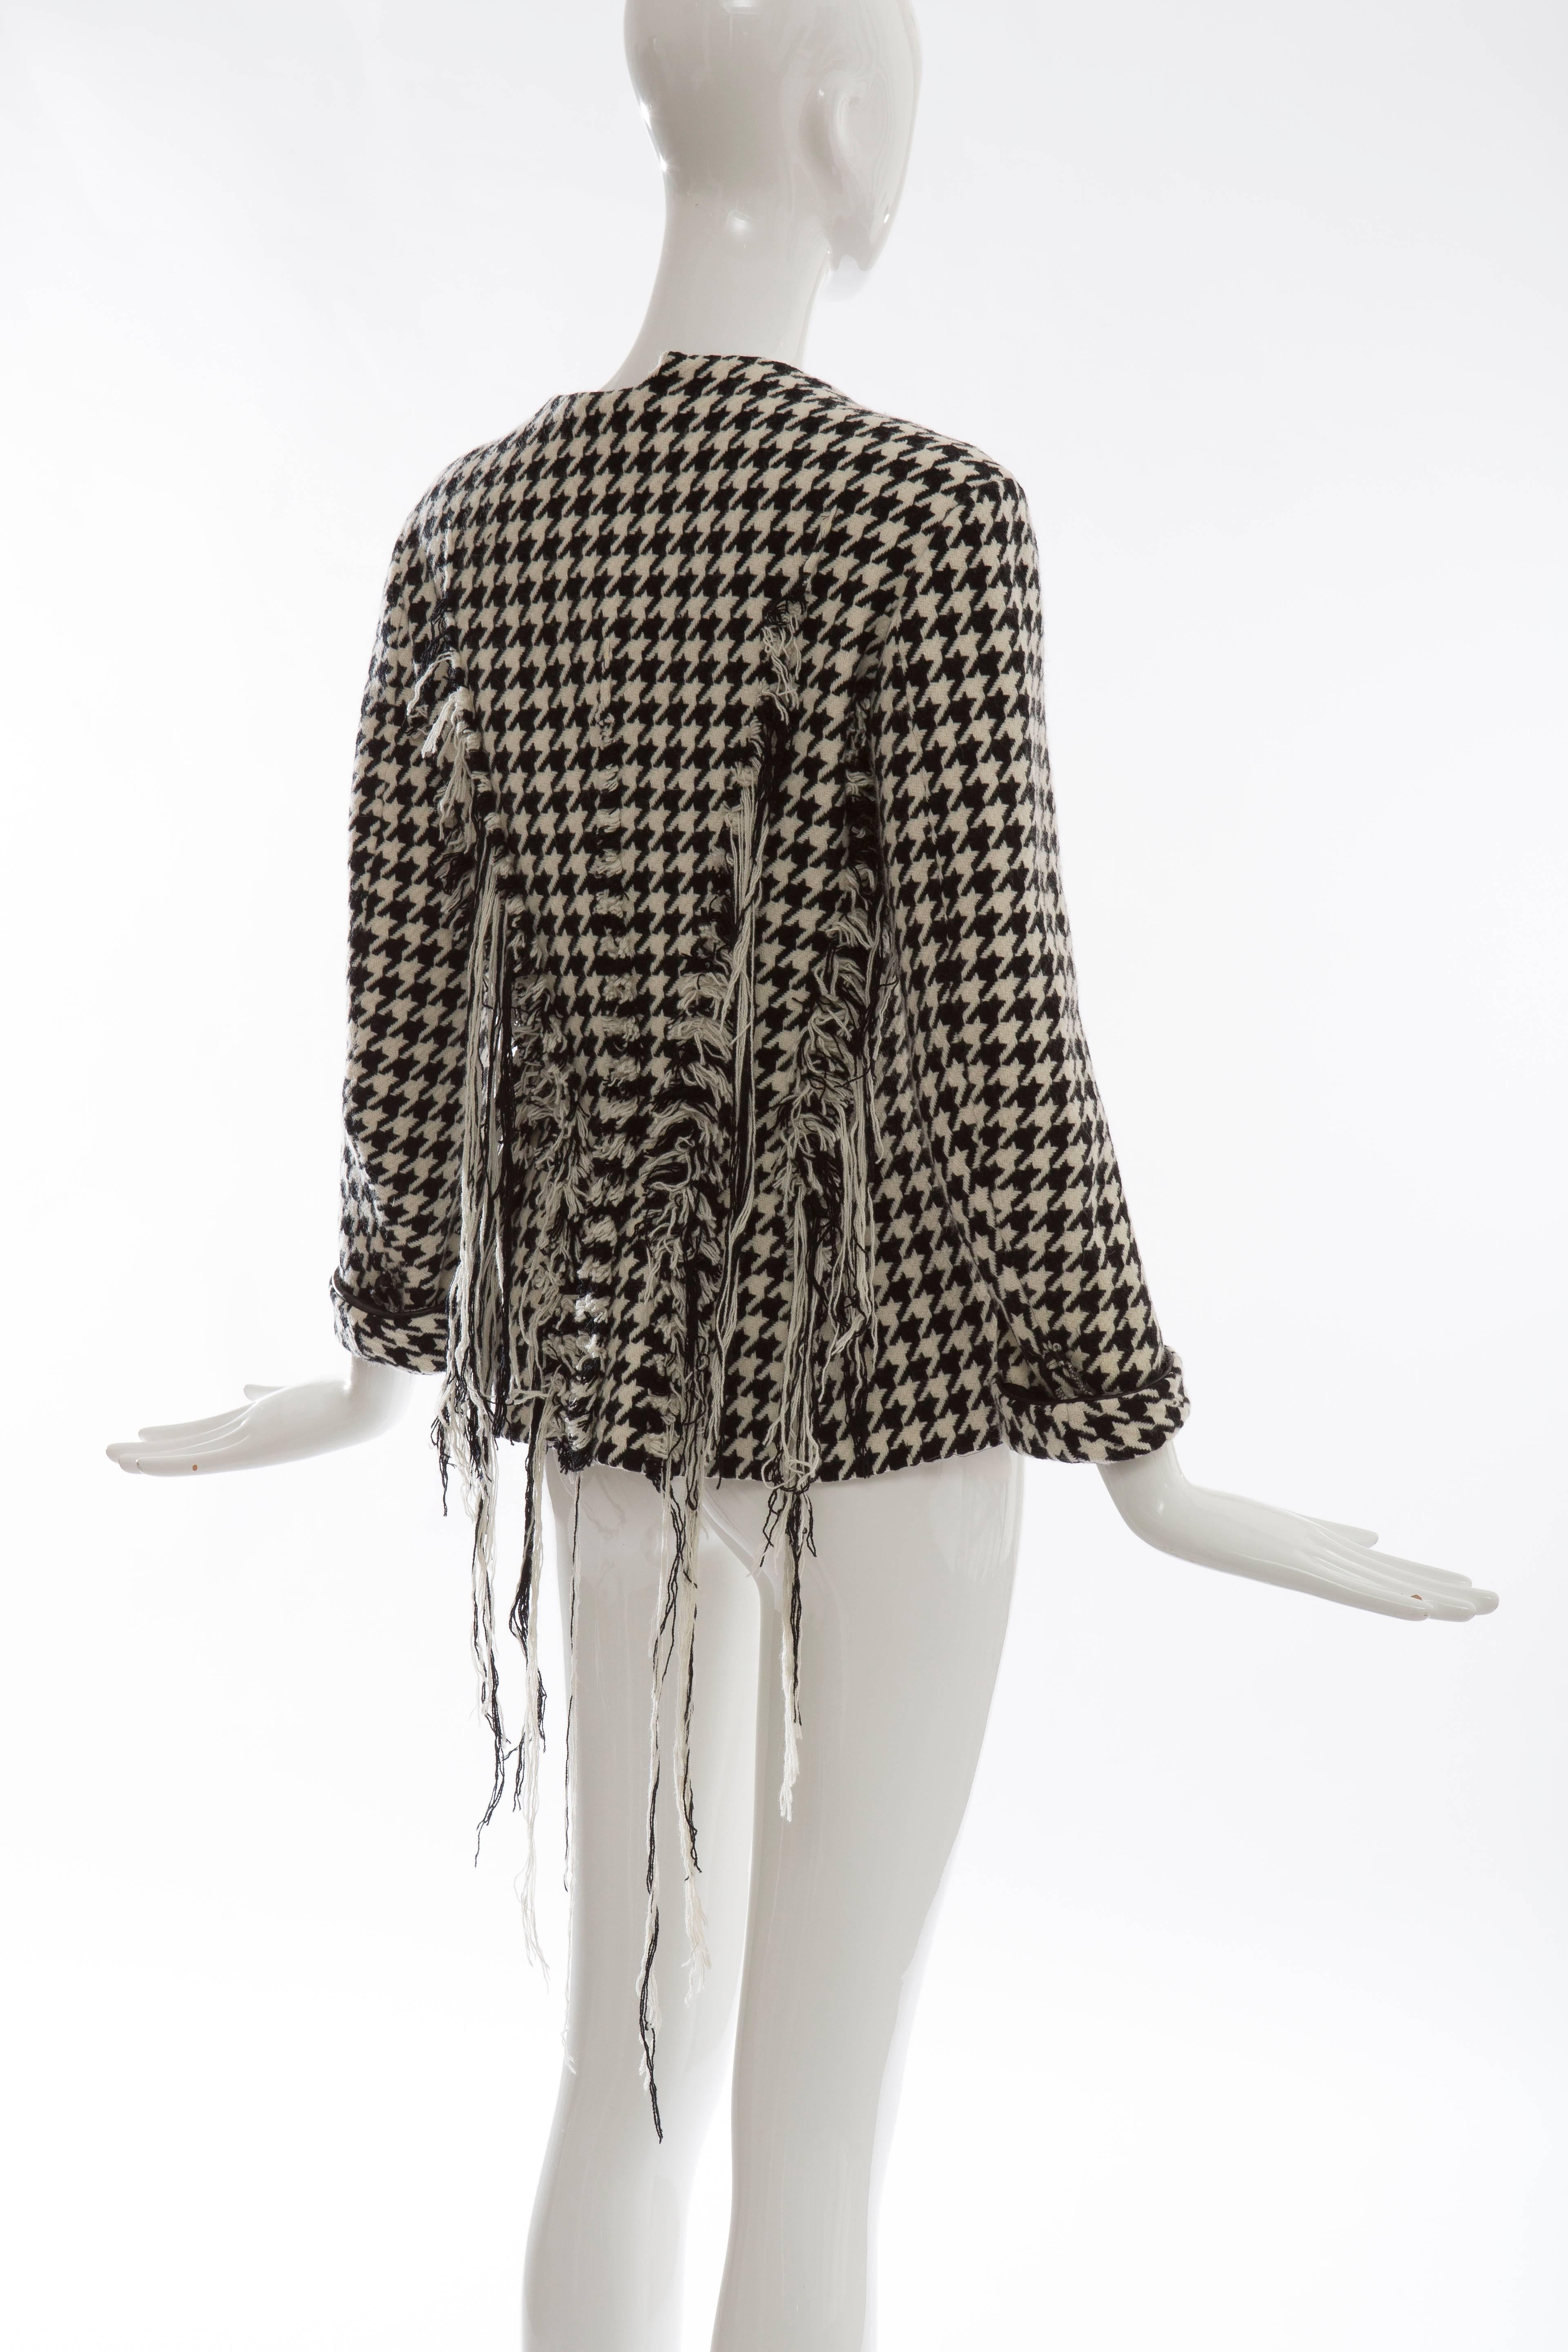 Yohji Yamamoto Wool Houndstooth Jacket With Leather Trim, Autumn / Winter 2003 For Sale 2